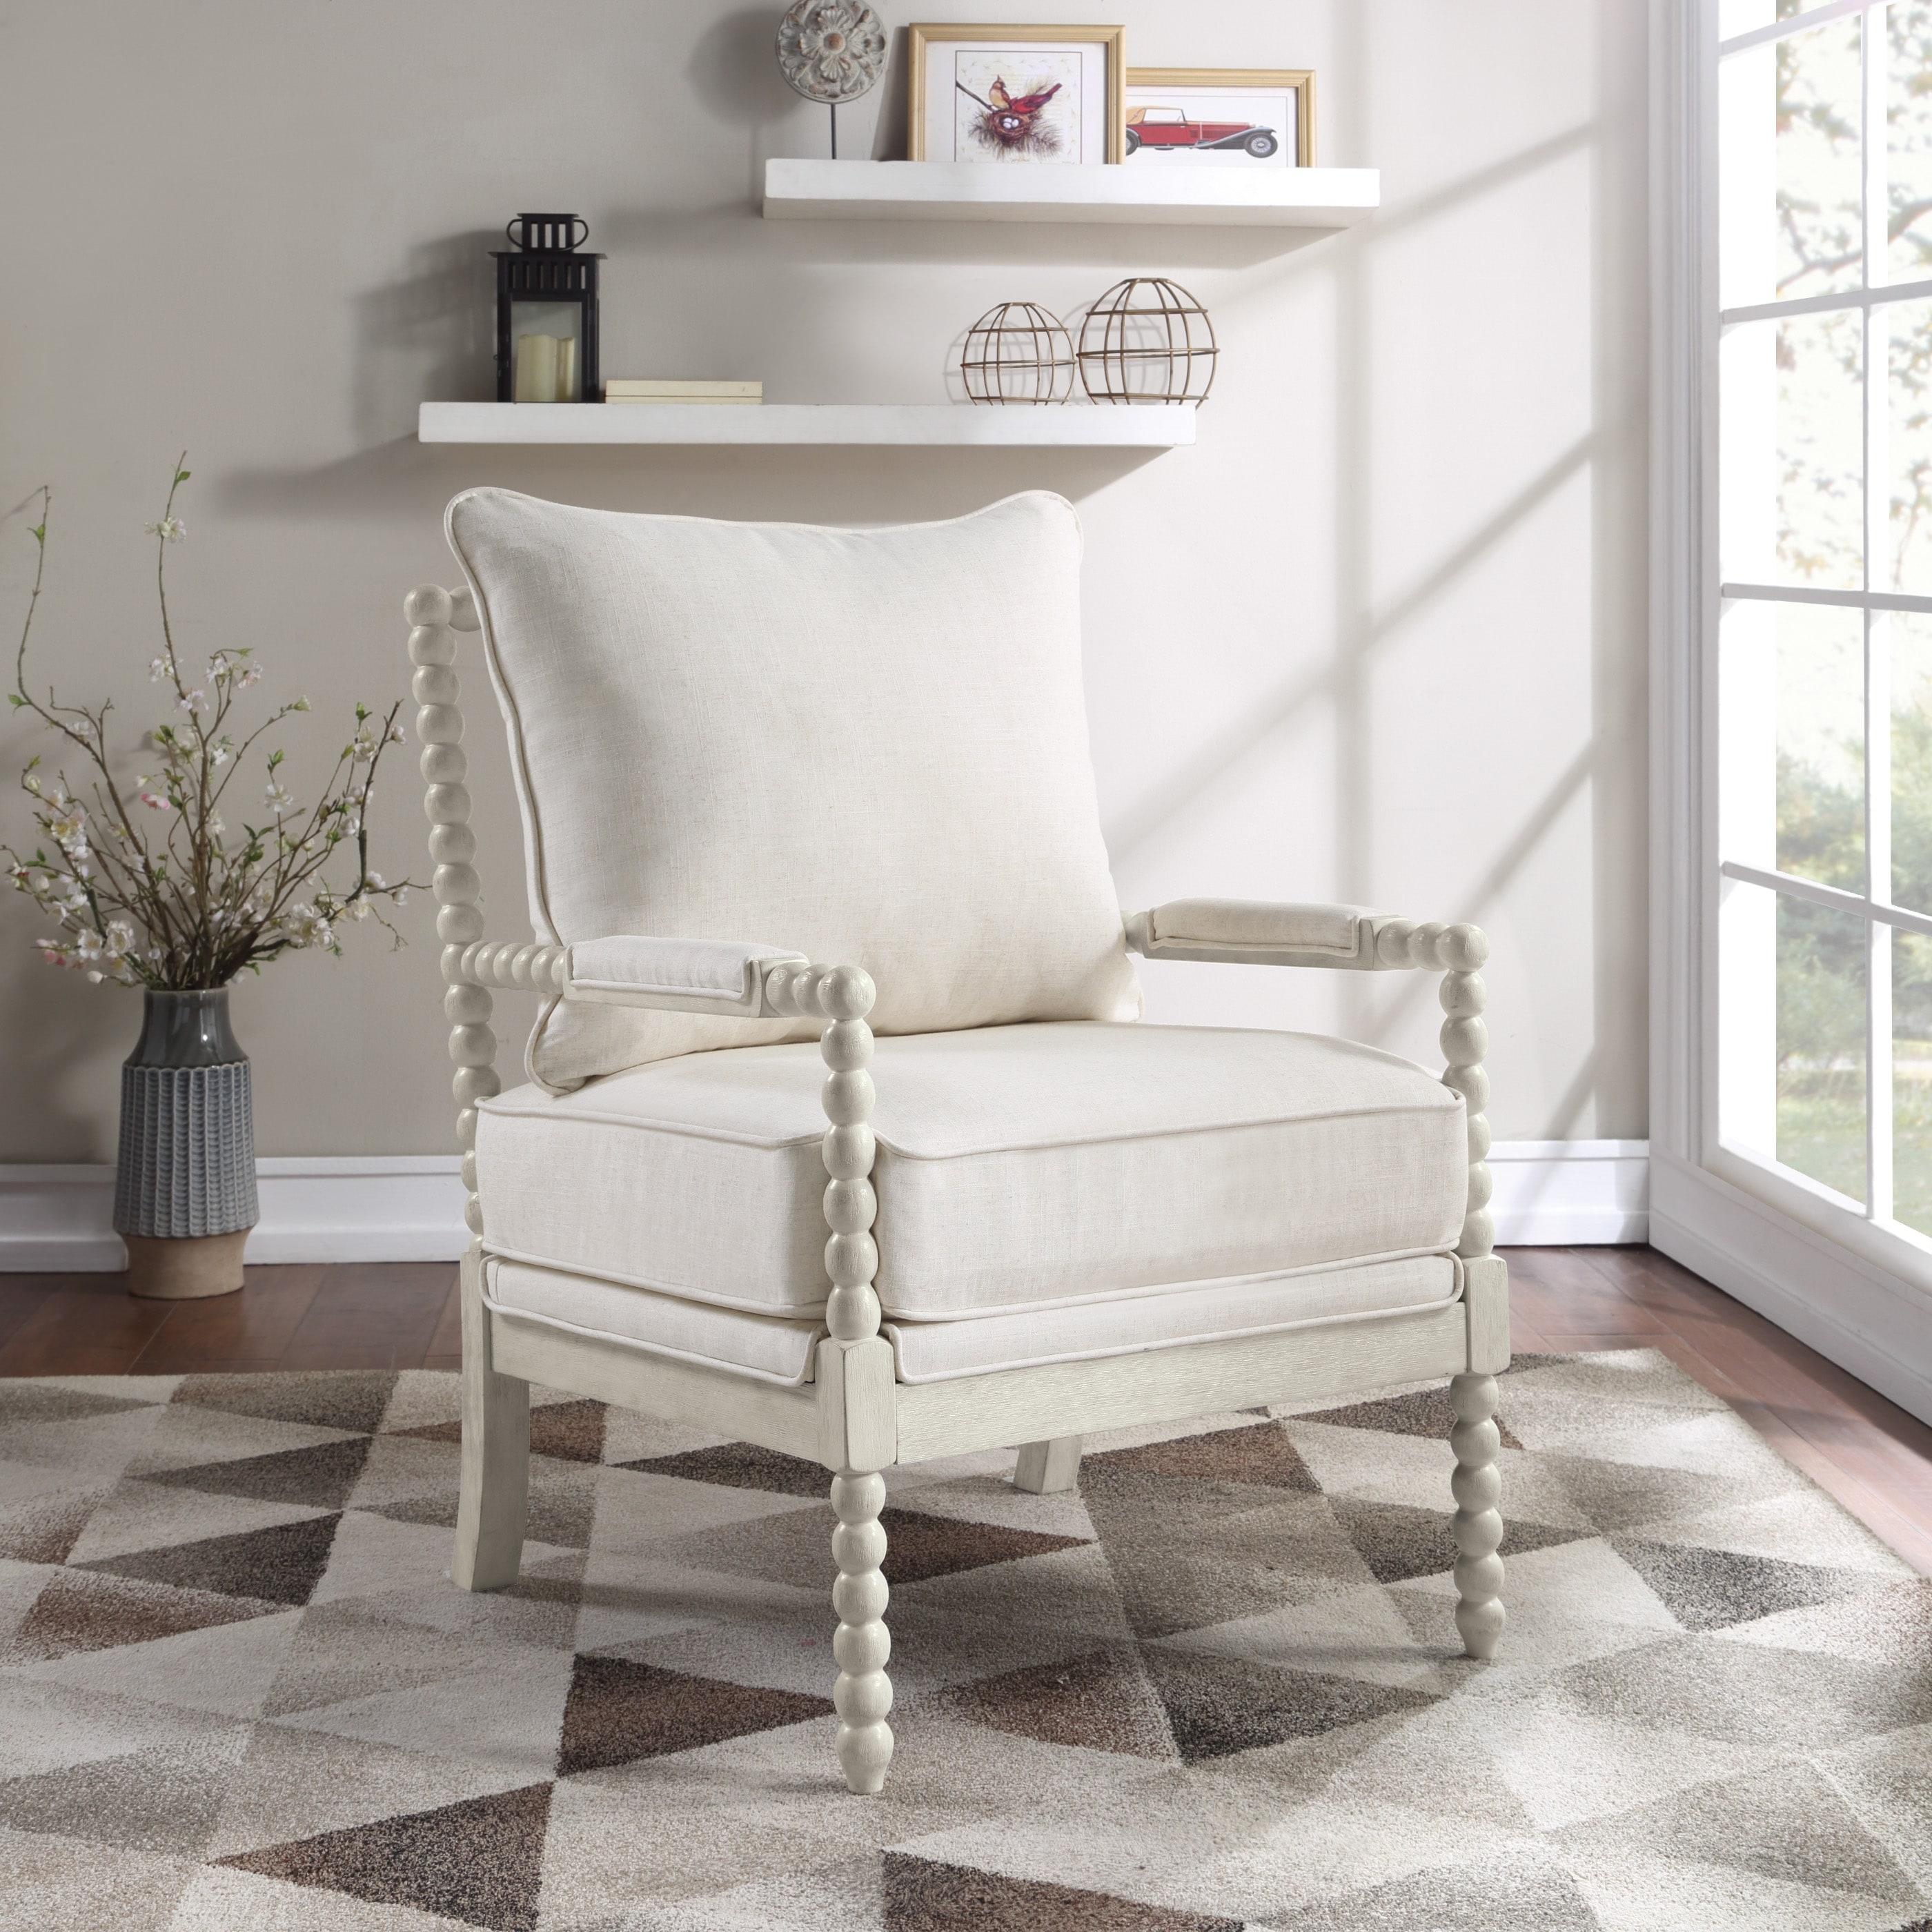 https://ak1.ostkcdn.com/images/products/is/images/direct/acc4a168a1397360236e32c1b944b7b550e9db09/Kaylee-Spindle-Chair-in-Fabric-with-White-Frame.jpg